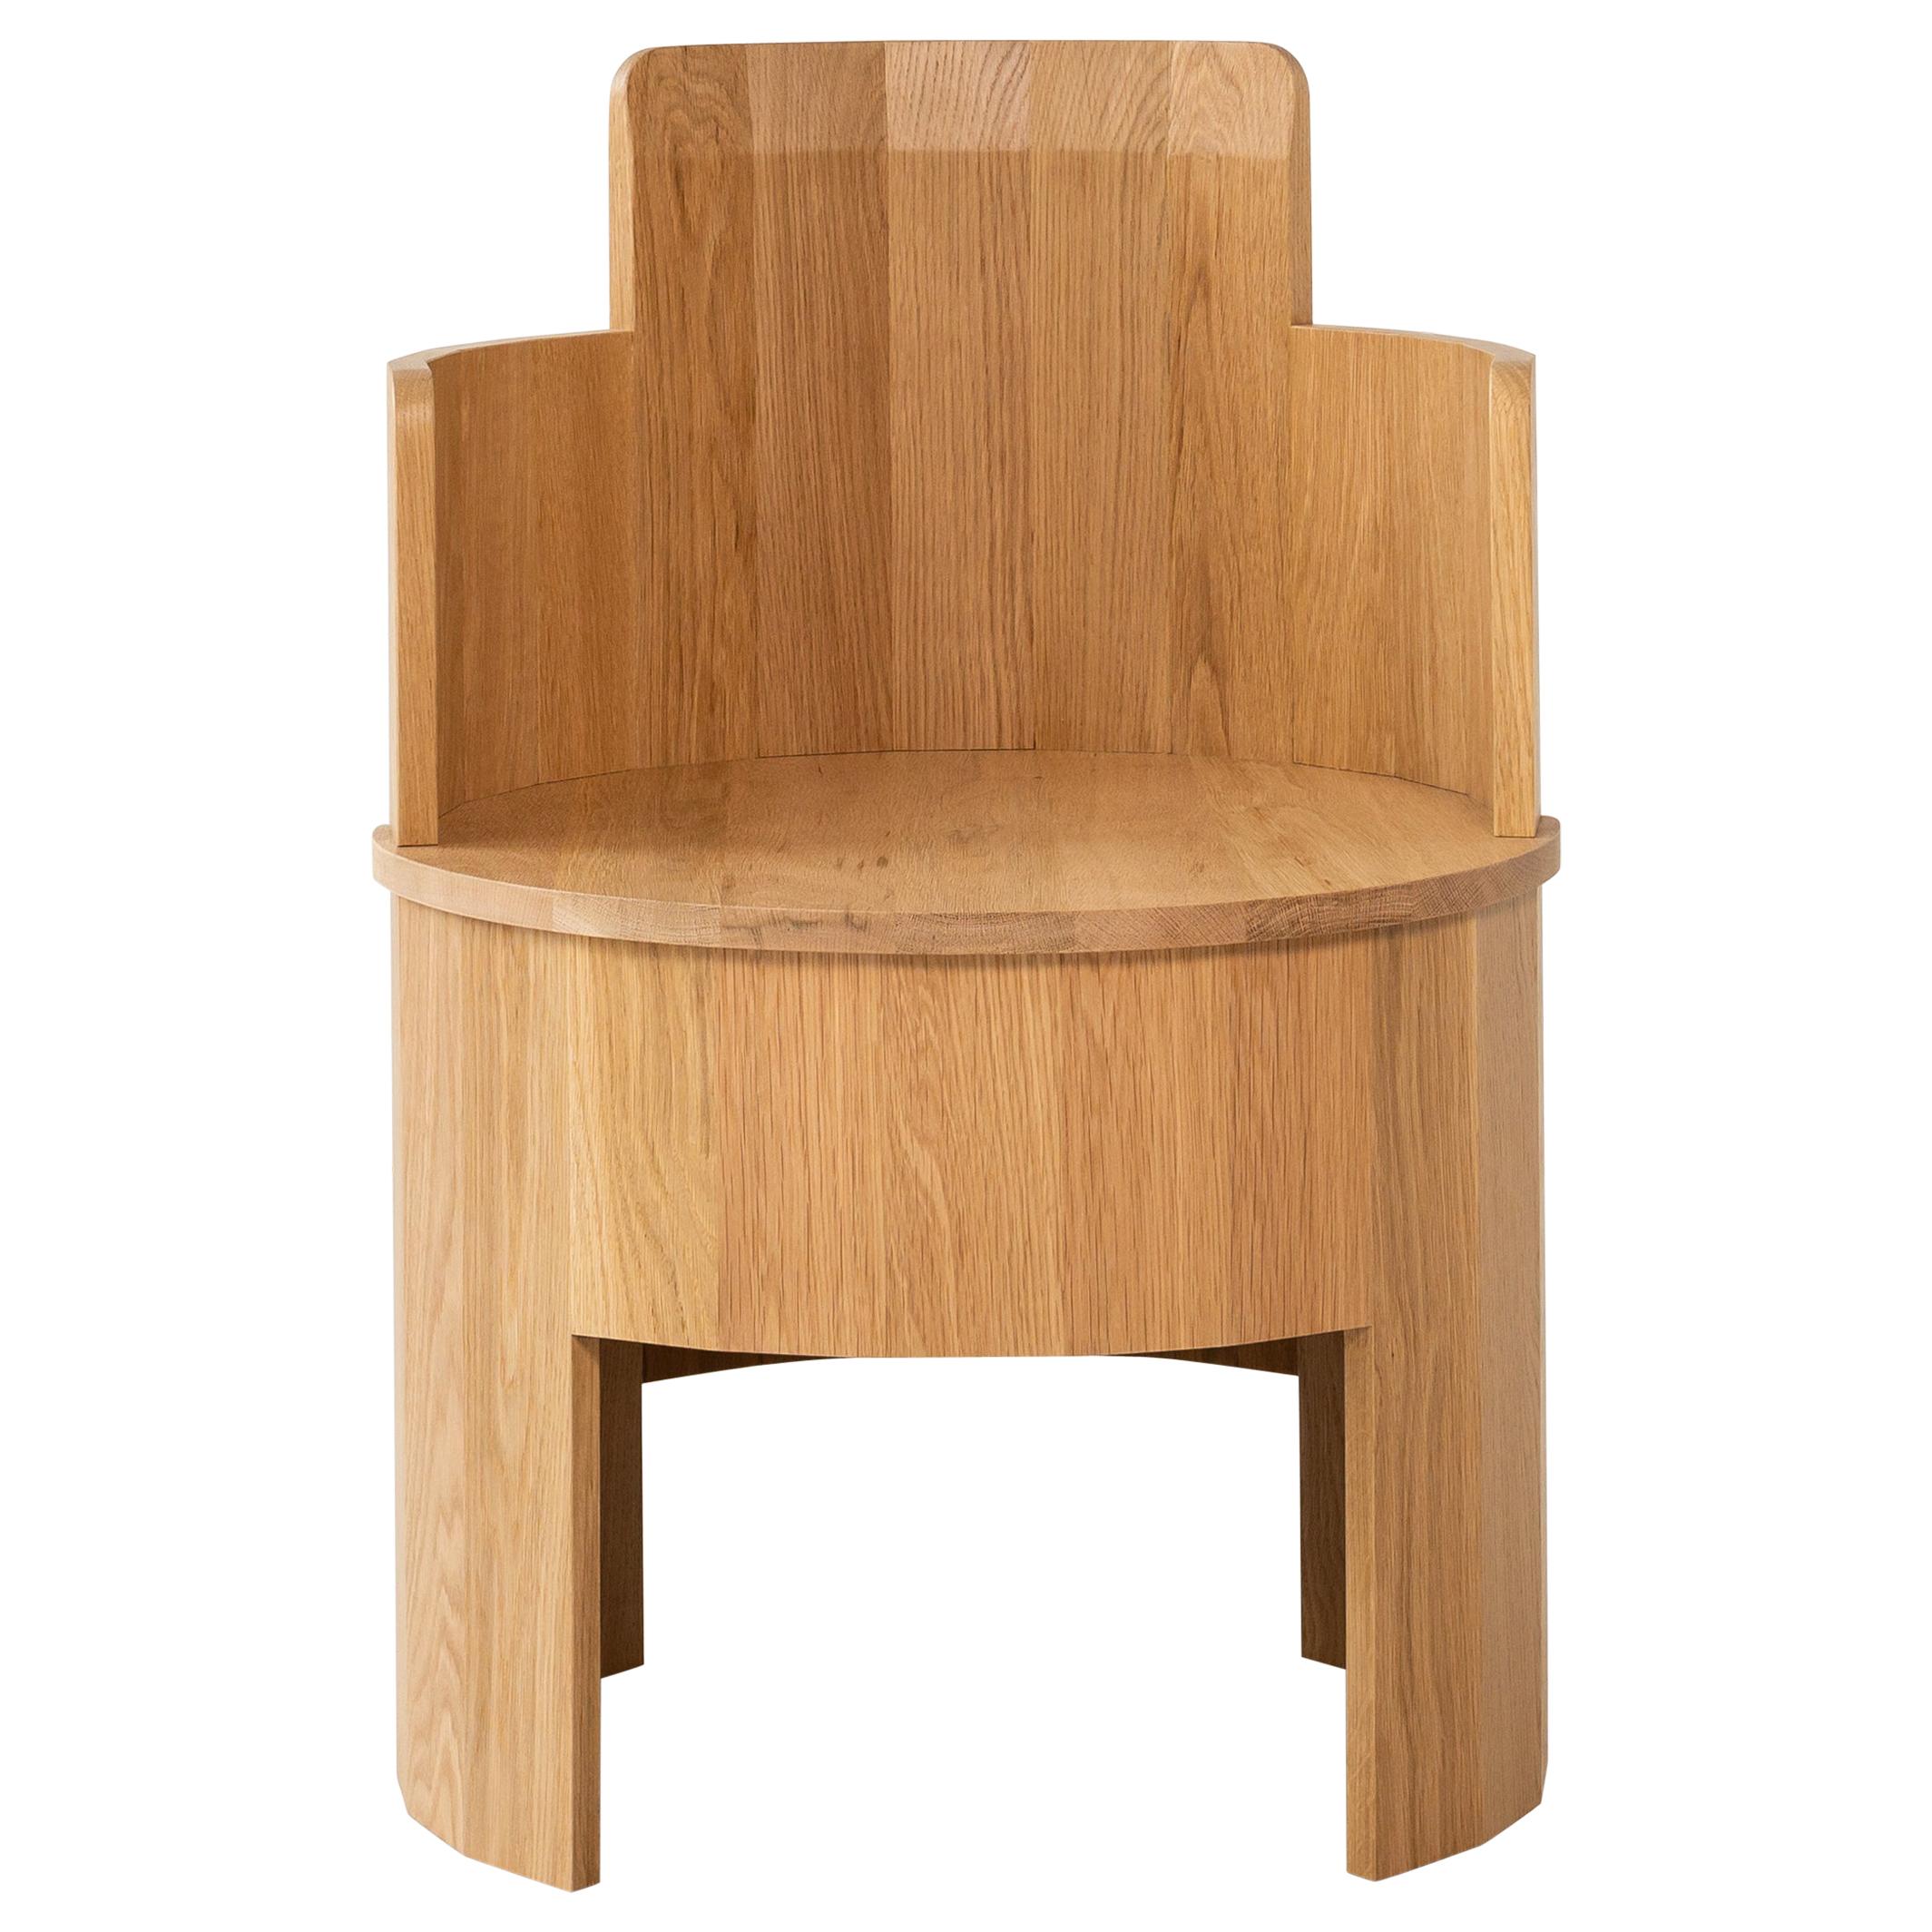 Contemporary White Oak Wood Cooperage Chair by Fort Standard, In Stock For Sale